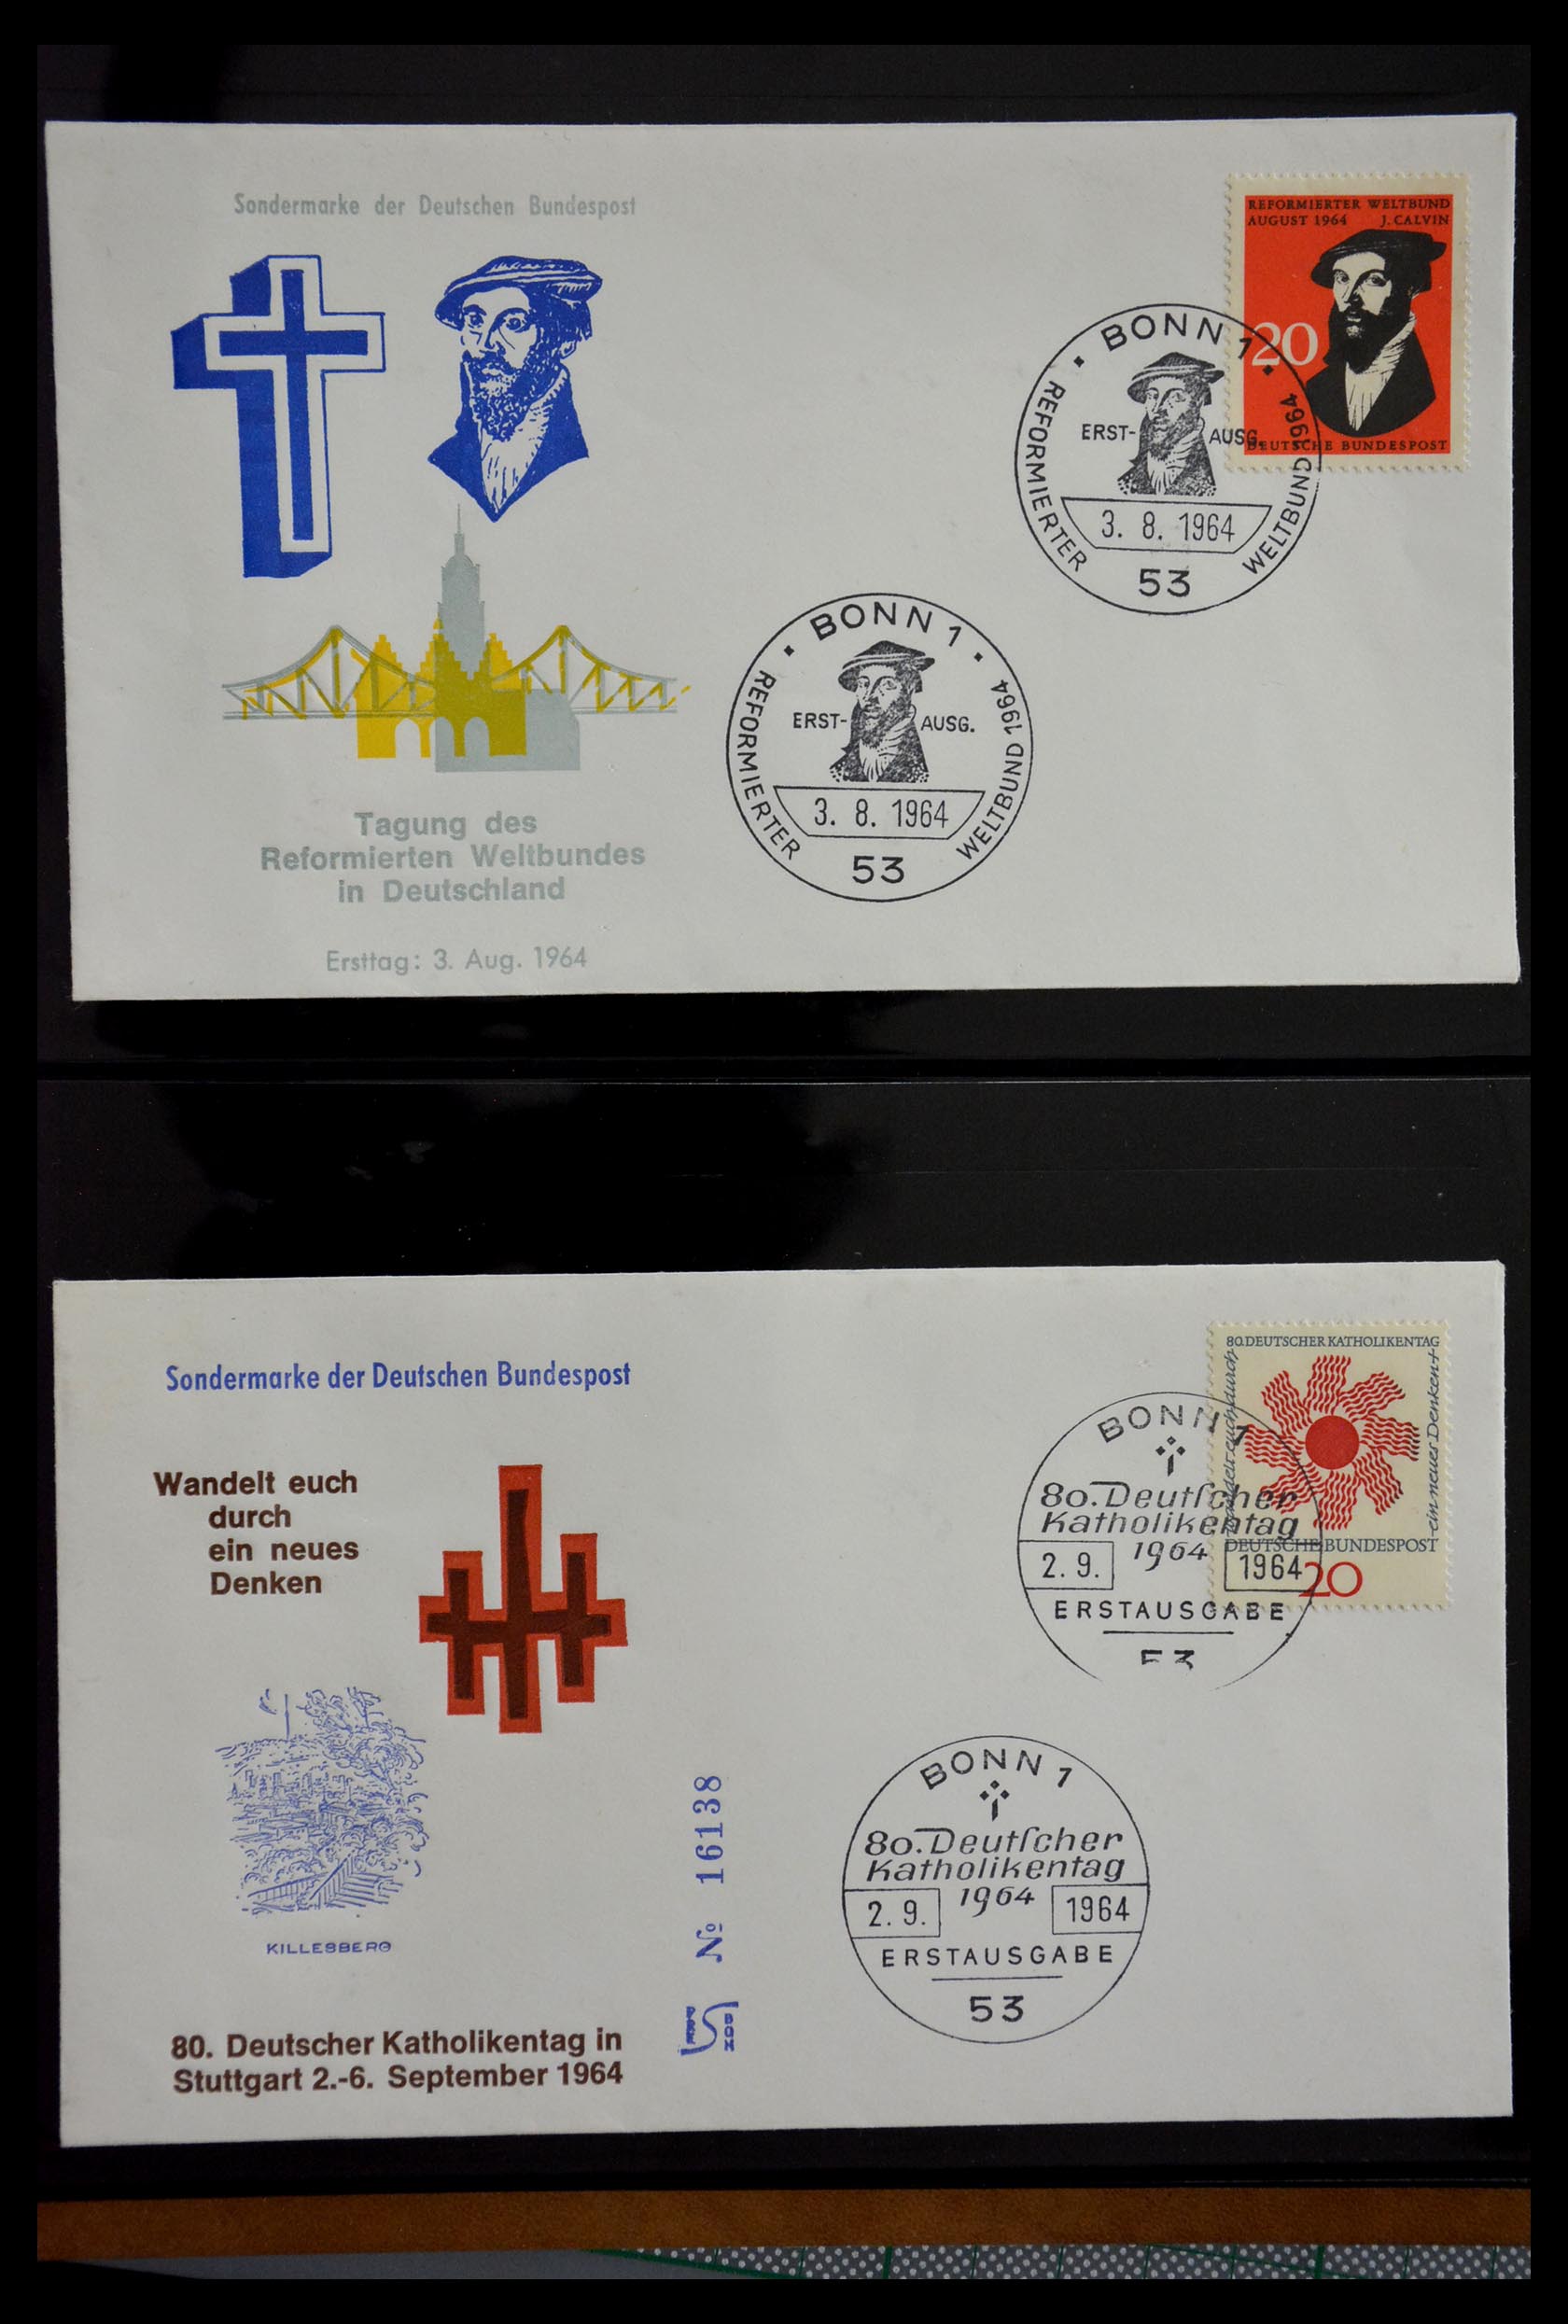 29382 035 - 29382 Germany covers and FDC's 1936-1965.